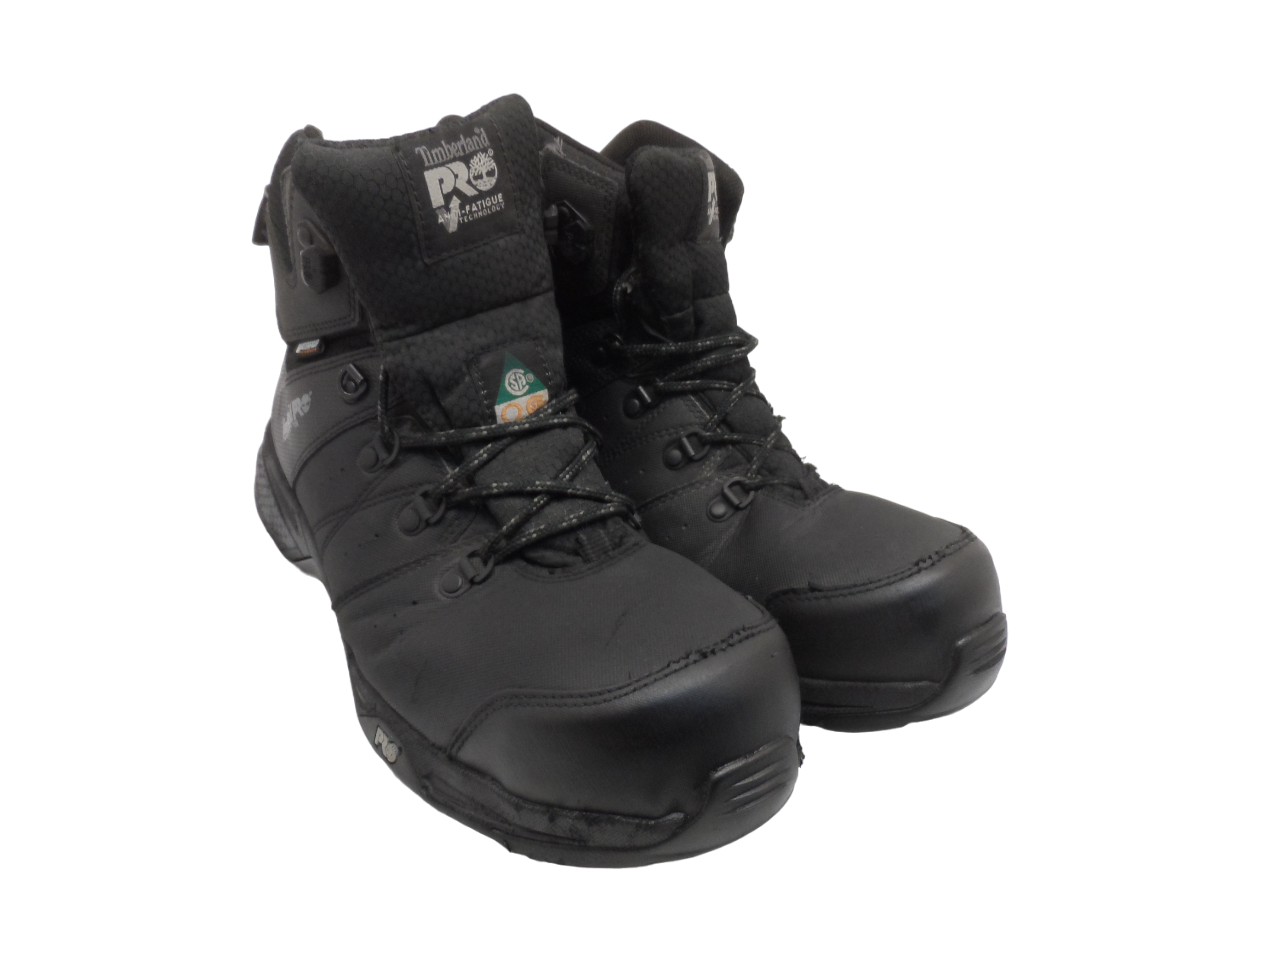 Timberland PRO Men's A2CB8 Switchback Waterproof Composite Toe Boot Black 10.5W - $75.99